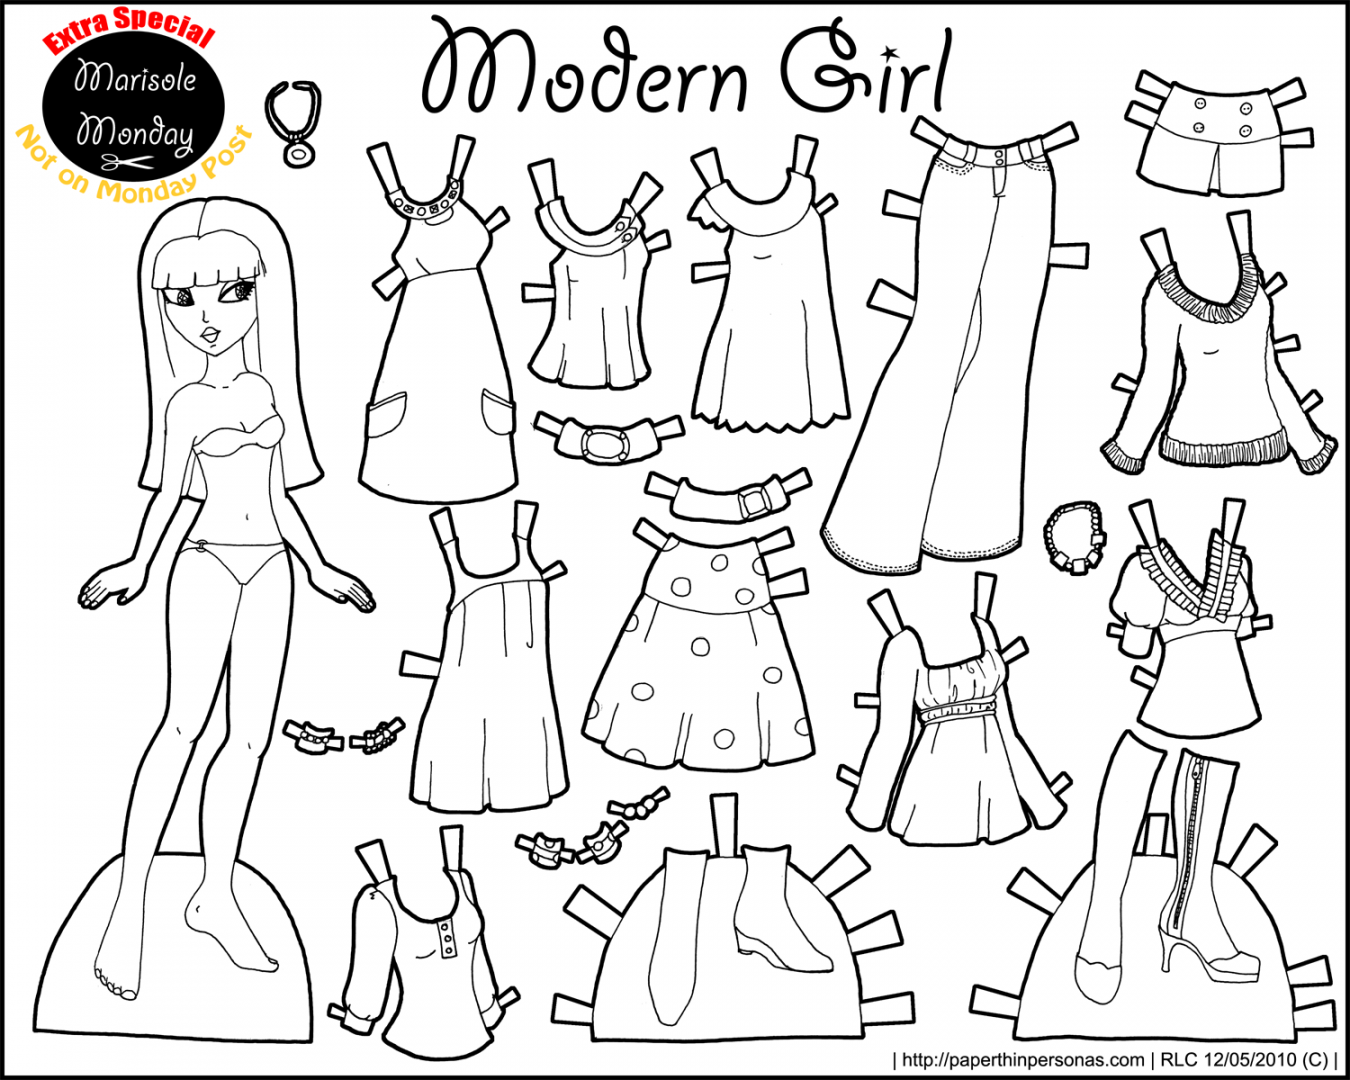 Free Printable Cut Out Paper Dolls - Printable - Black and White Printable Paper Doll • Modern Girl